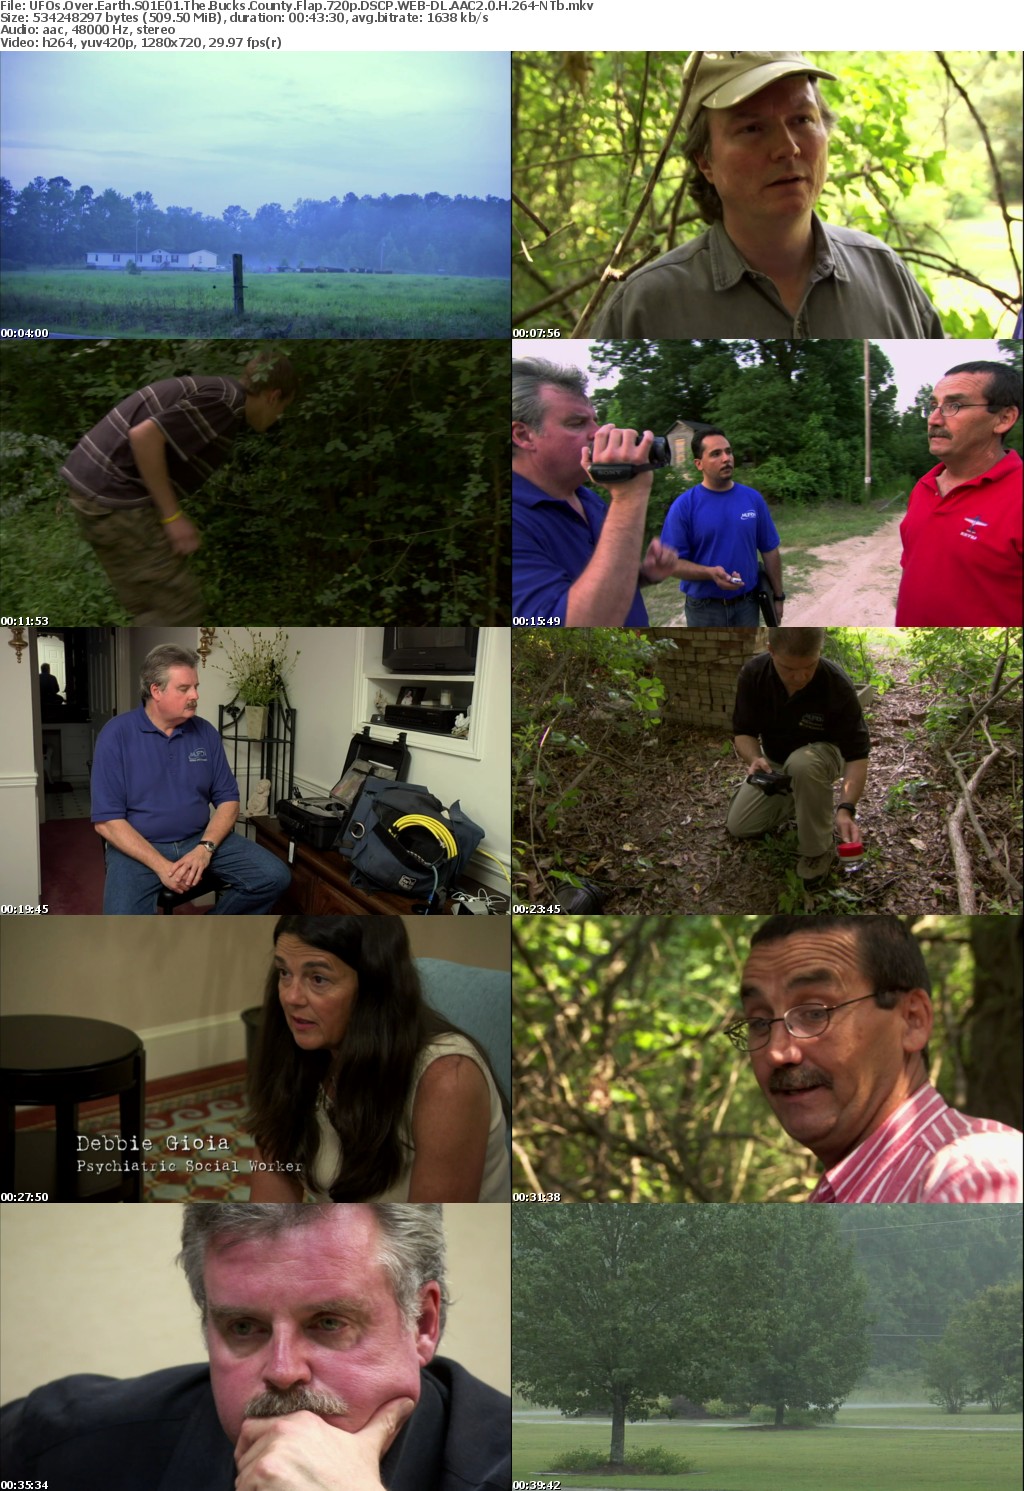 UFOs Over Earth S01E01 The Bucks County Flap 720p DSCP WEB-DL AAC2 0 H 264-NTb